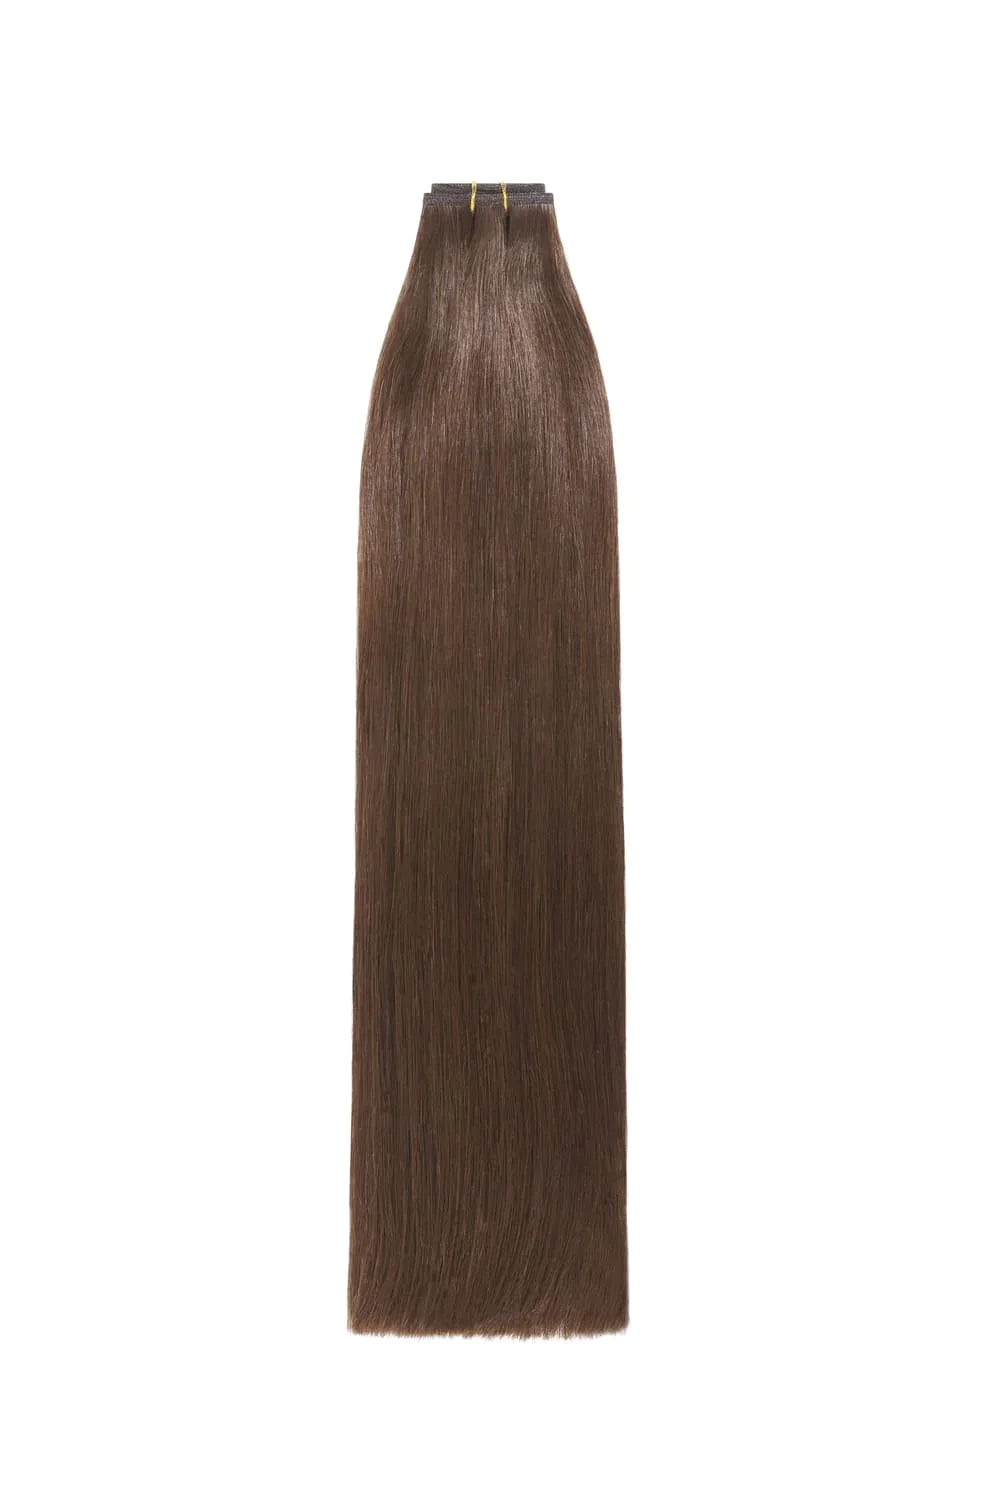 Medium Brown (#4) Remy Royale Flat Weft Hair Extensions